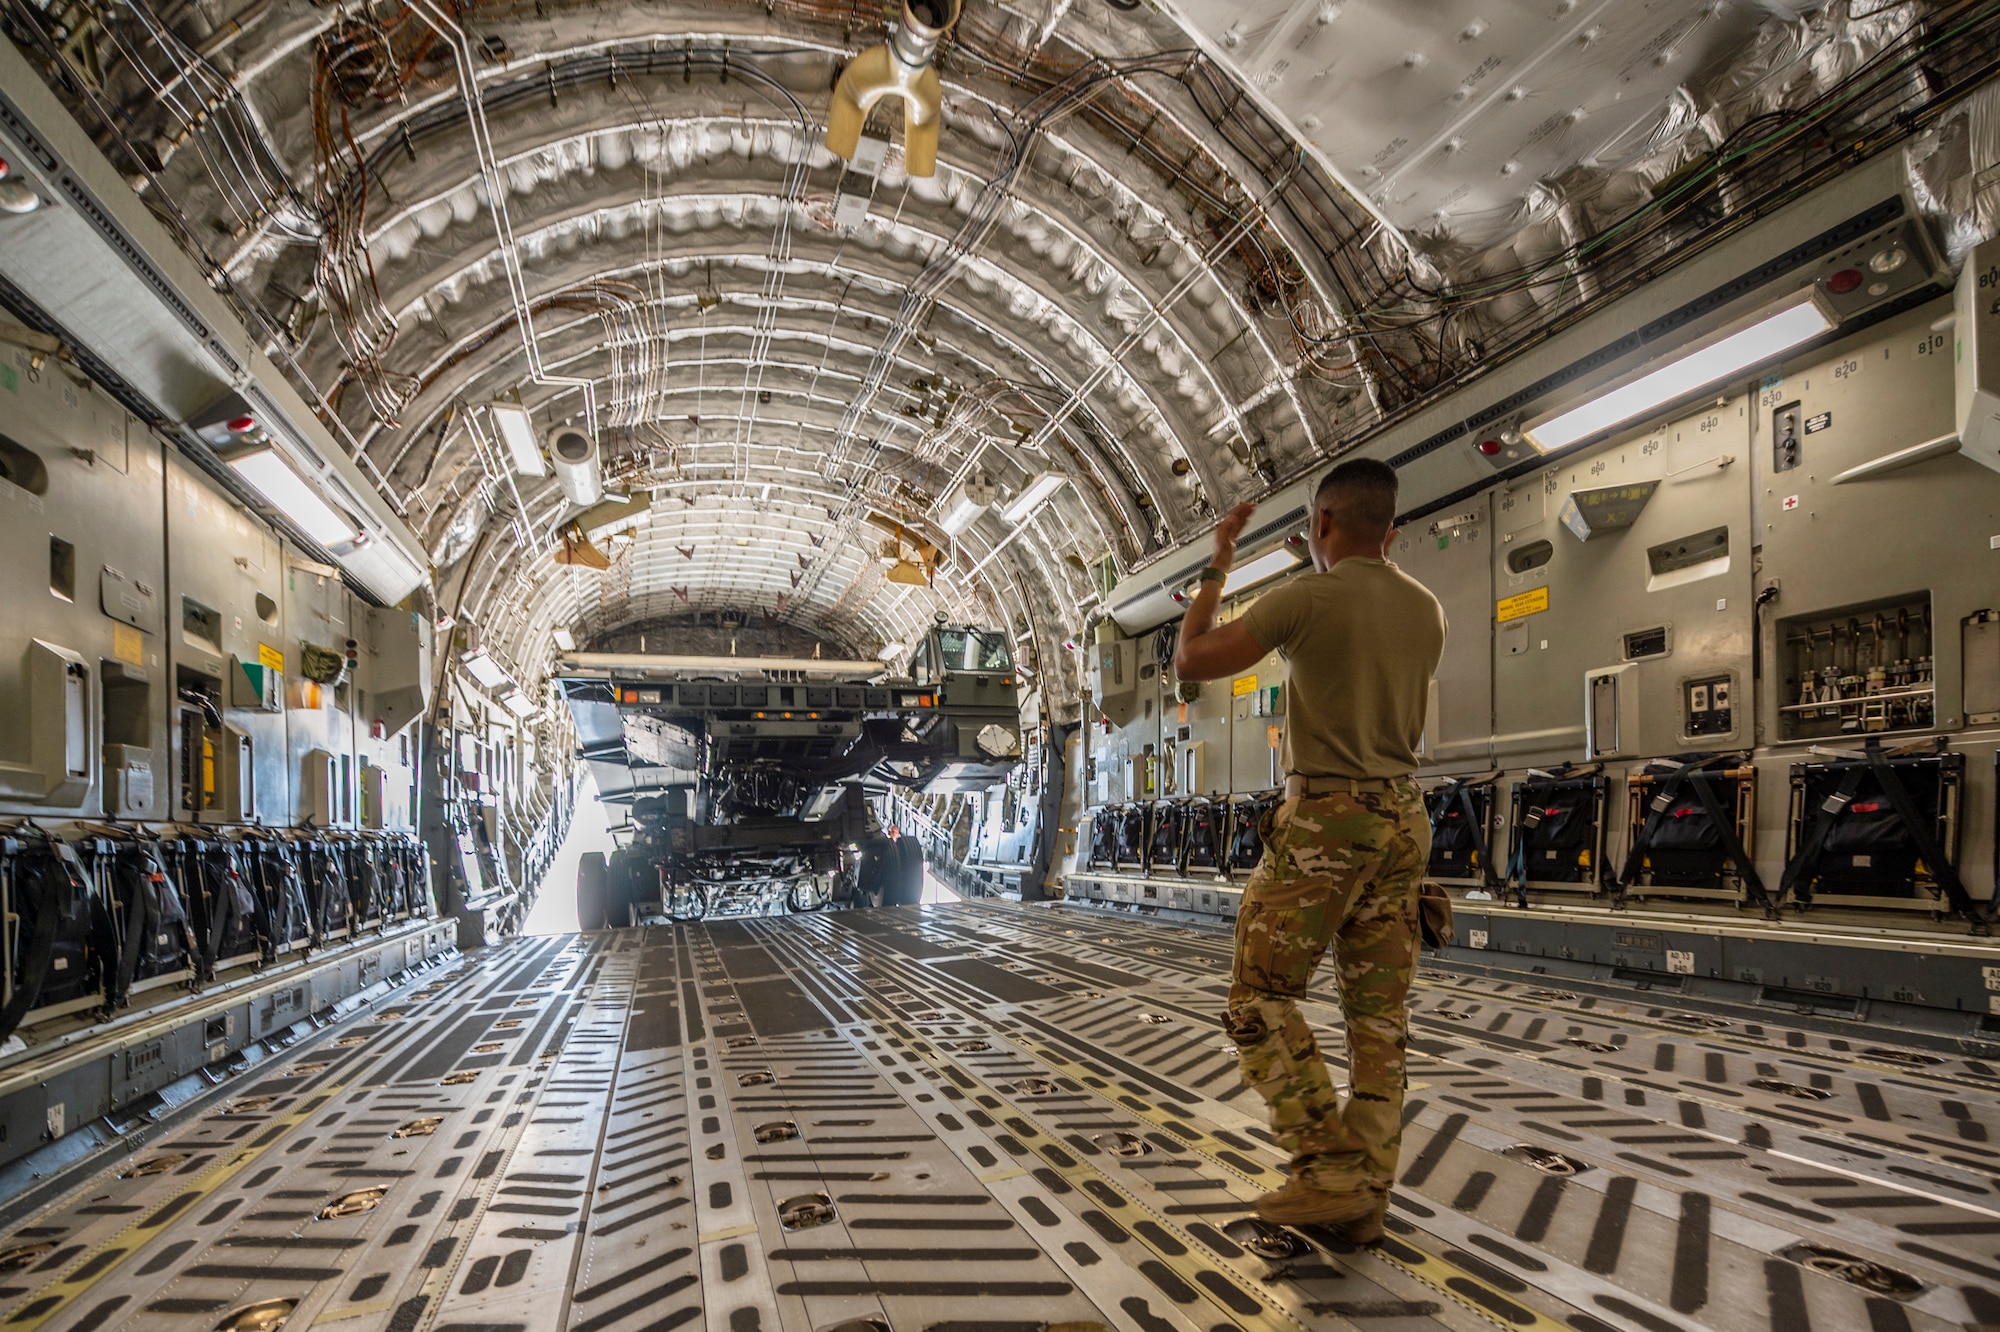 A man gestures towards a large military vehicle that is used to load pallets on to large military aircraft, in side of a C-17 Globemaster III, a large Air Force aircraft.